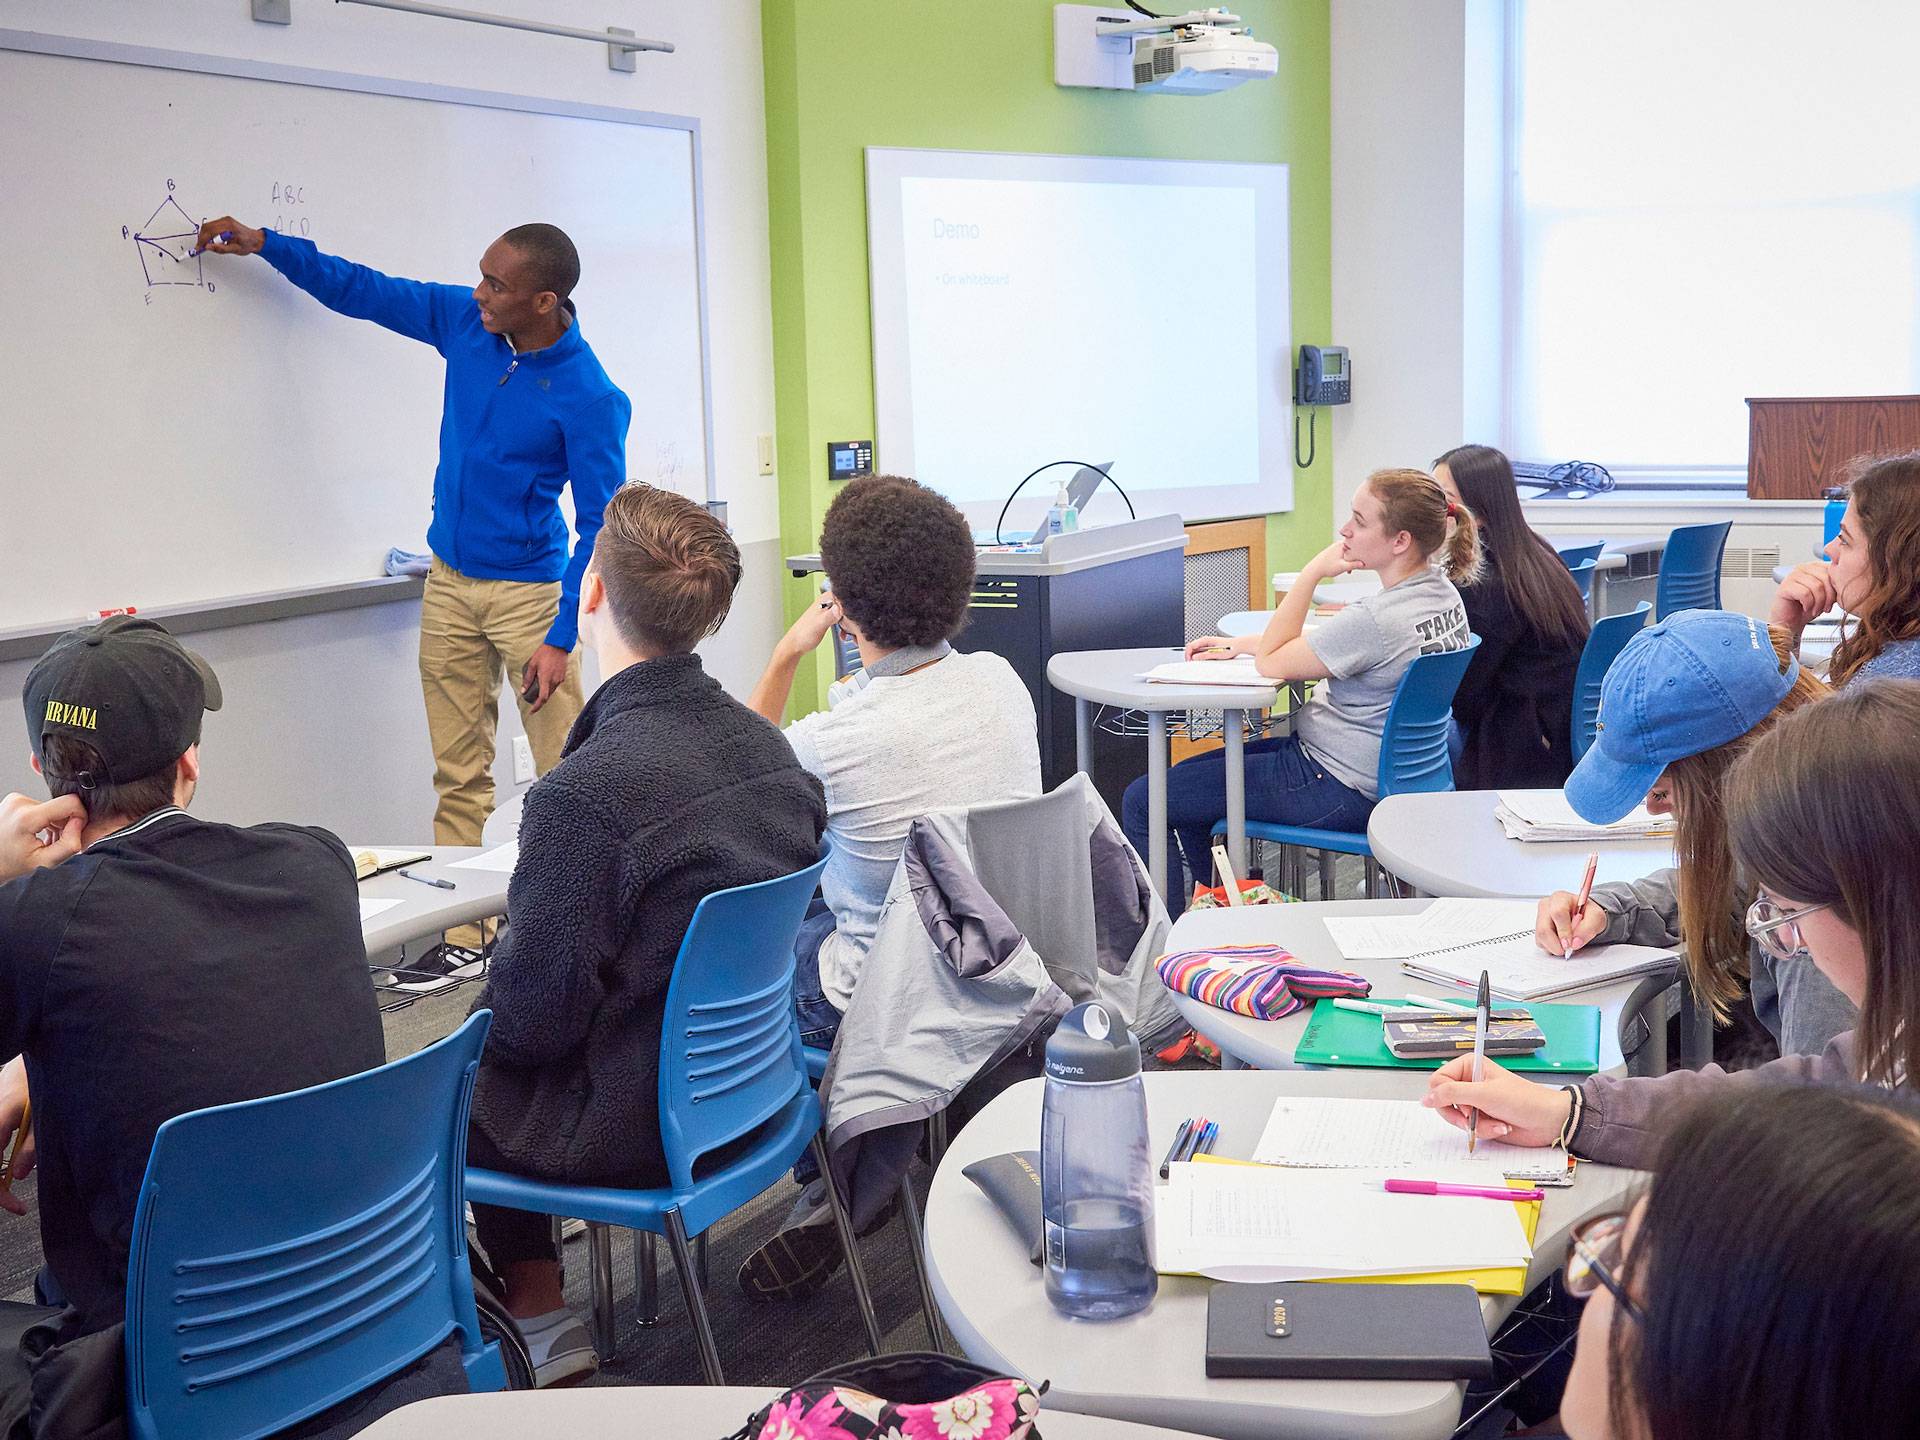 An African American student in a blue zip jacket and chinos draws a diagram on a white board in front of his classmates.